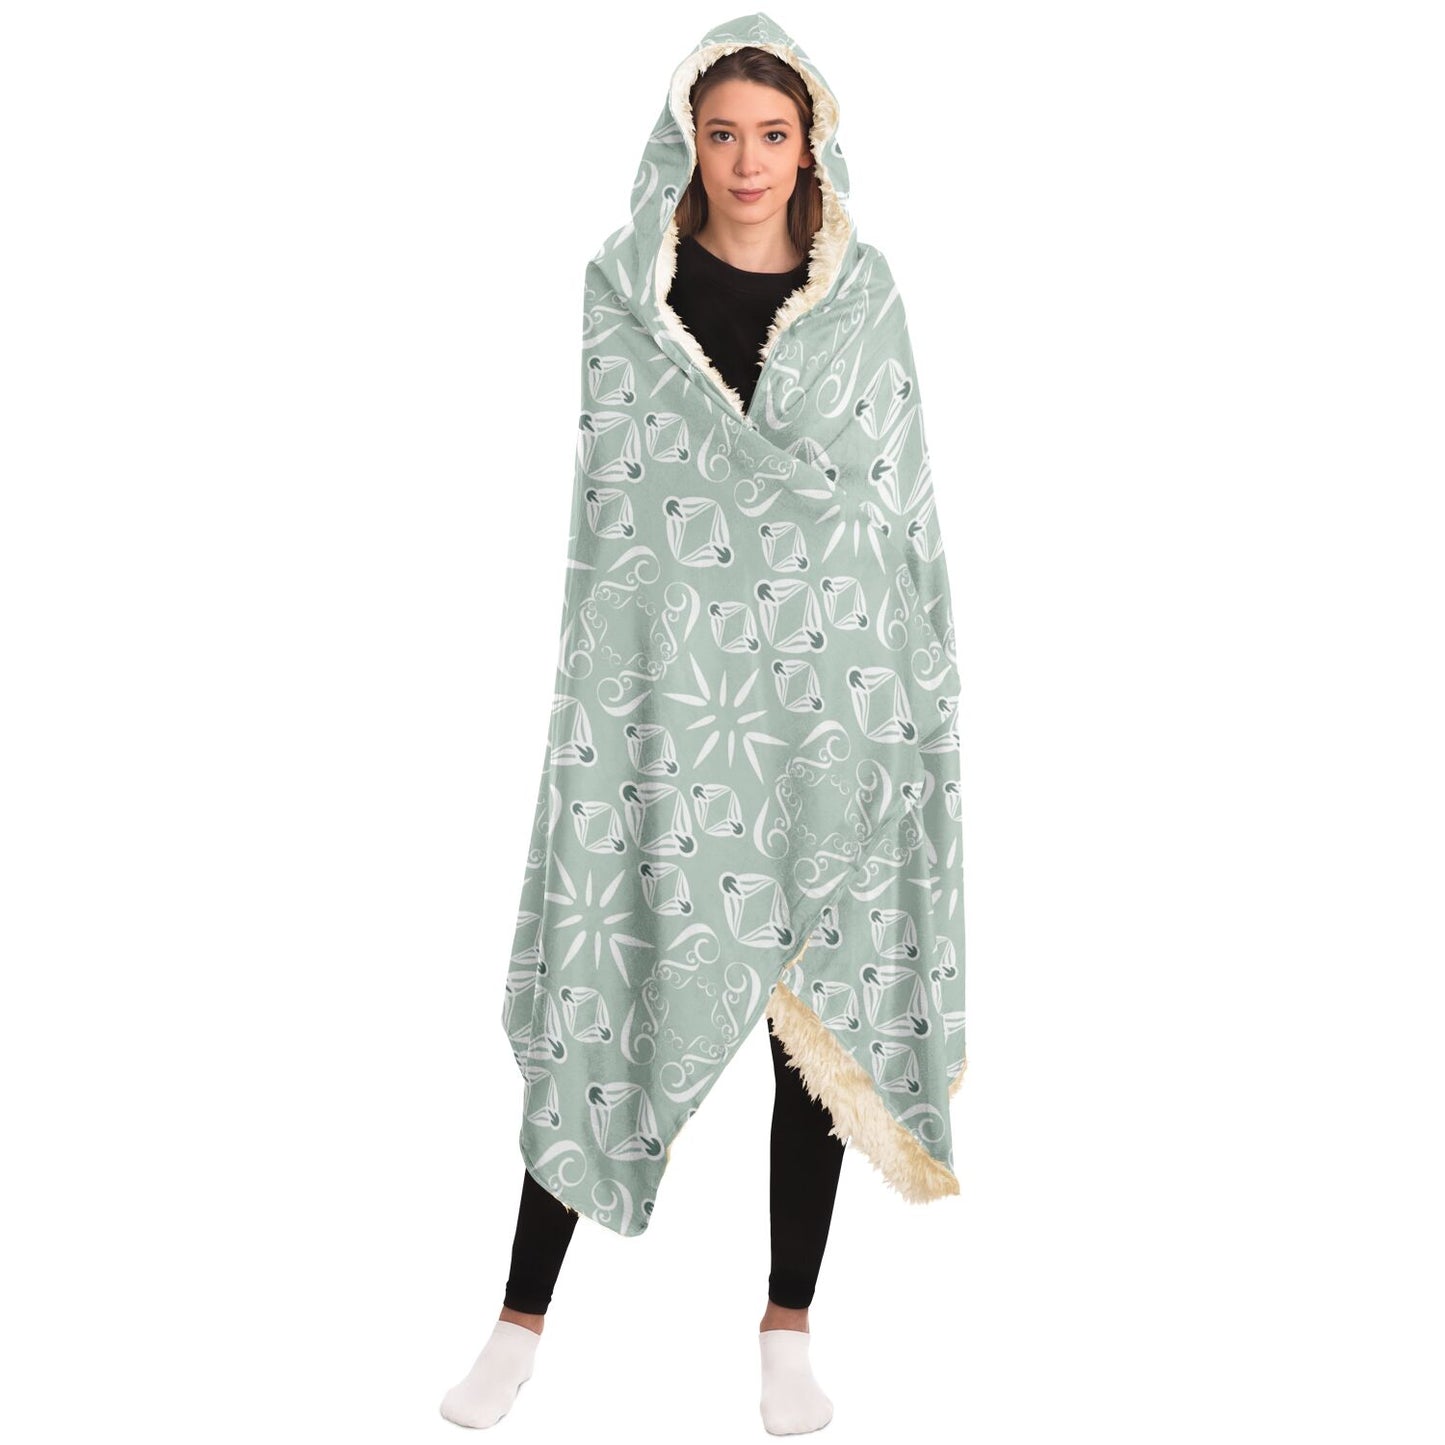 Hooded Blanket - AOP Kukloso Abstractical No 43 Shapes on Sage - Free Shipping